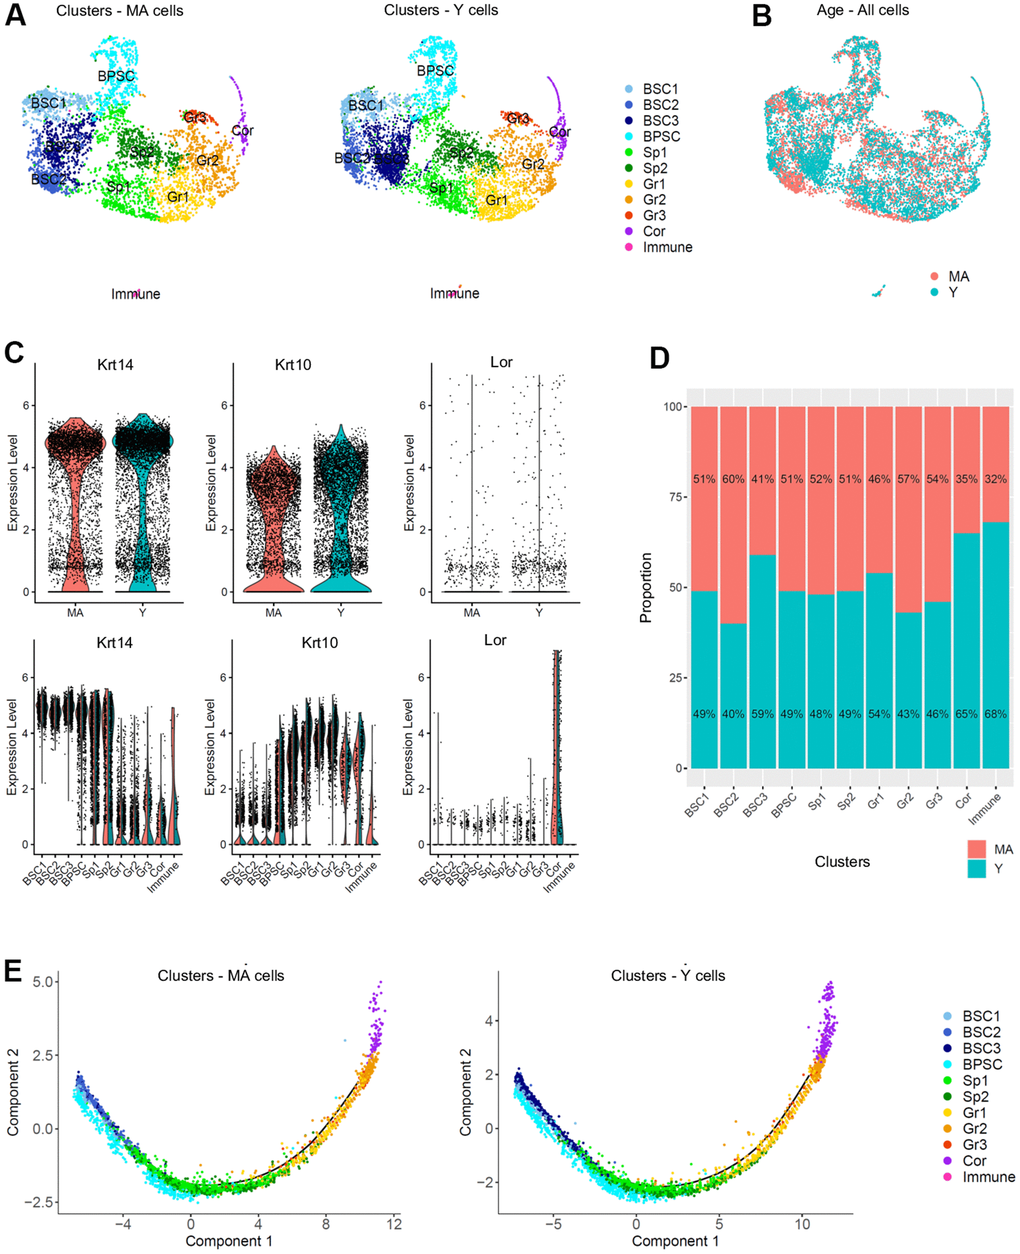 Single cell populations and trajectories analysis of young versus middle-aged NMR epidermal cells reveals no difference between the 2 age groups. (A) Uniform Manifold Approximation and Projection (UMAP), colored according to unsupervised clustering from middle-aged (MA; n=4,218 cells) and young (Y; n=6,014 cells) NMR epidermal cells. Cell populations from both MA and Y NMR were unchanged as the same 11 clusters were detected. (B) Cells from both MA (red) and Y (blue) NMR were jointly projected on the same UMAP plot, showing an overlap of the 2 age groups tested. (C) Violin plots of Krt14, Krt10 and Lor marker genes expressed by MA (red) and Y (blue) epidermal cells (upper panel) and segregated by cluster (lower panel). No detectable changes in their expression were found. (D) Bar graph representing the relative proportion of epidermal cells in each cluster between MA (red) and Y (blue) animals. There was no significant difference in epidermal cell proportion between the 2 age groups using Chi2 statistic test (pval ≤ 0,05). (E) Unsupervised differentiation trajectories constructed with M3Drop and Monocle v2.10.1 for MA and Y keratinocytes. Immune cells’ cluster 10 has been excluded to focus on epidermal keratinocytes. The results showed a unique trajectory with no branches in both samples and the same repartition of cluster among the trajectory. BSC = basal and stem cells; BPSC = basal proliferating and stem cells; Sp = Spinous layer cells; Gr = granular layer cells; Cor = corneous layer cells.